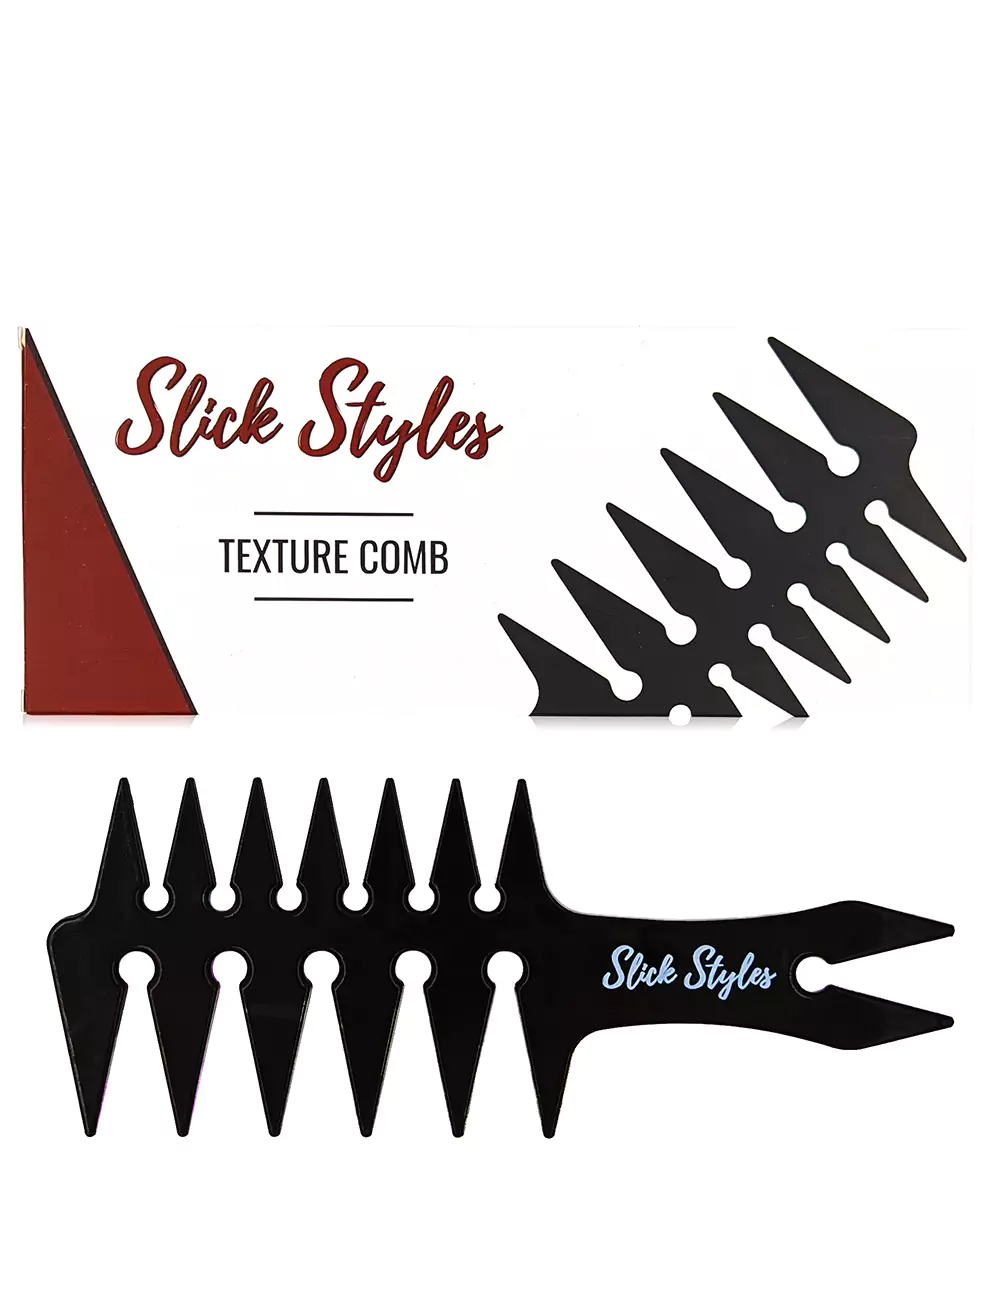 Slick Styles Texture Comb Mens Black Wide Tooth Barber Comb Hair Style Styling